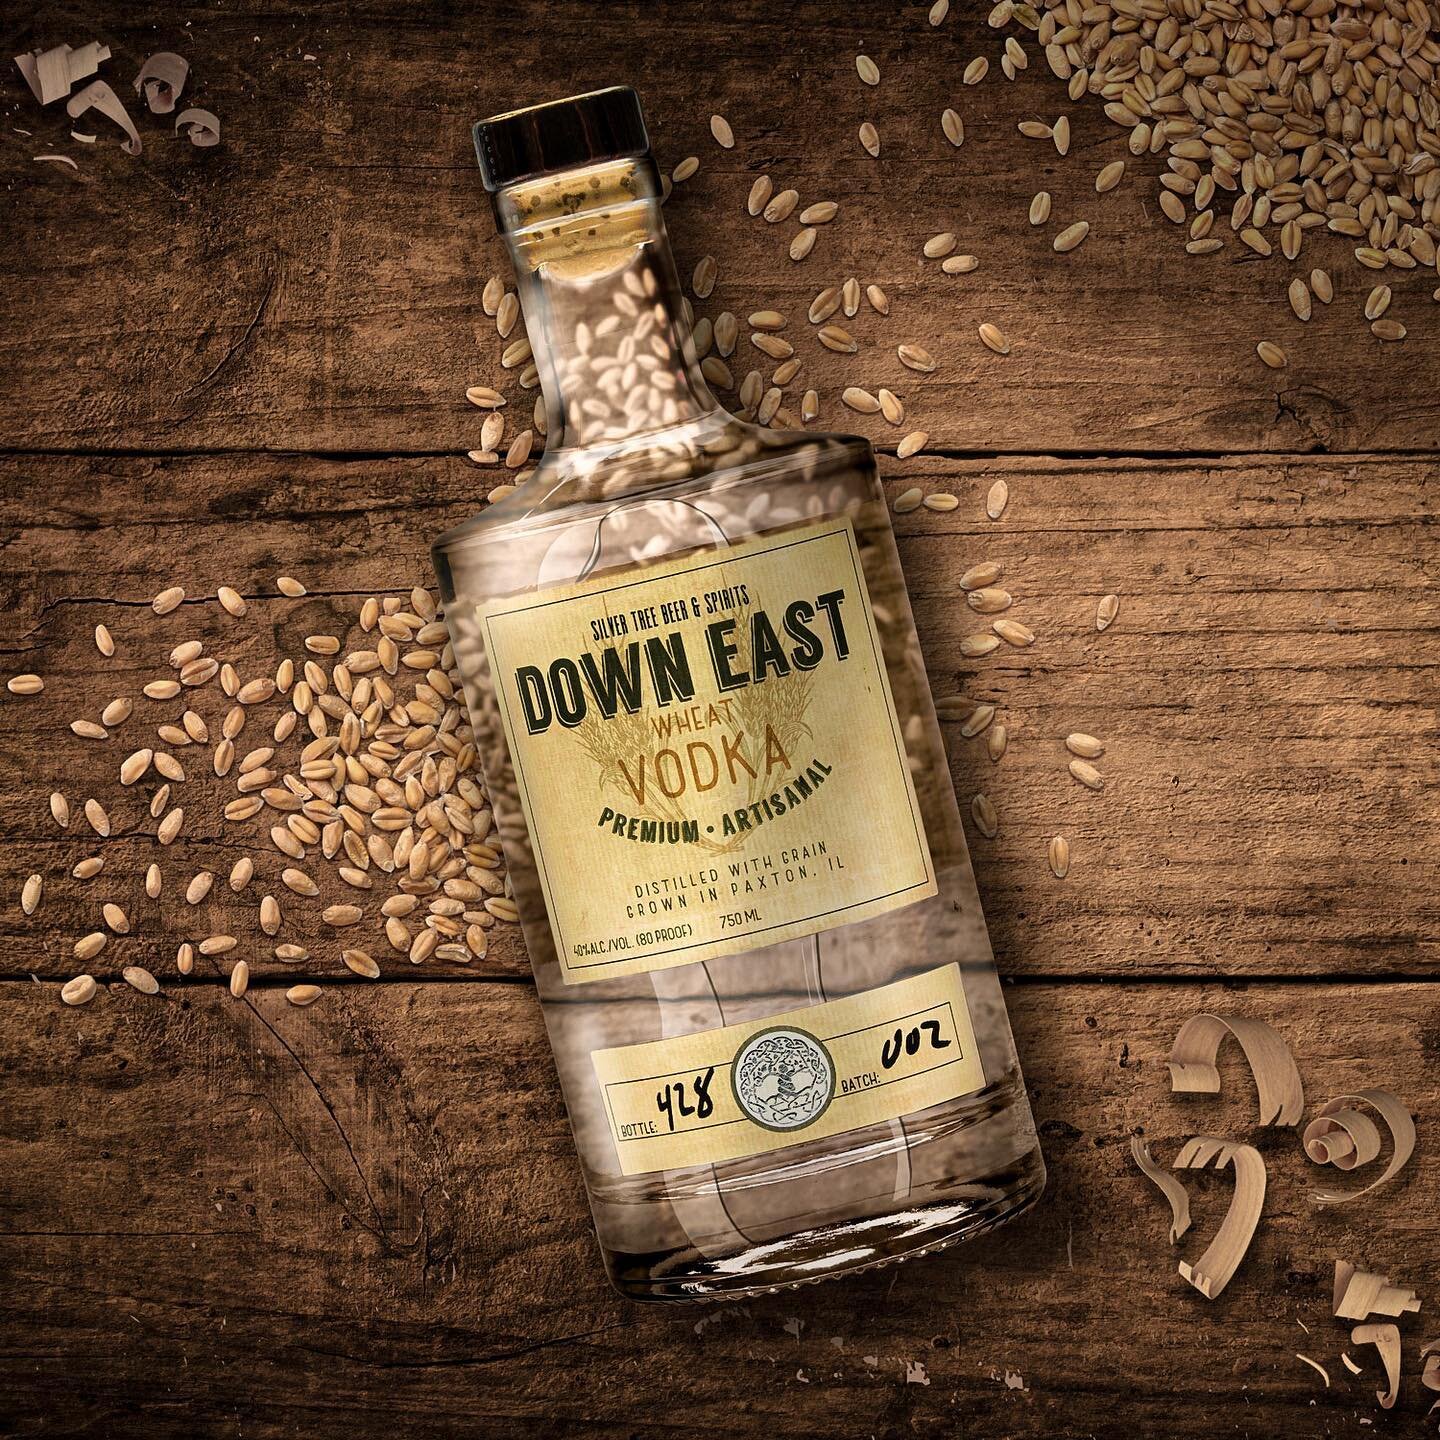 It&rsquo;s a Down East kind of day
&bull;
&bull;
&bull;
&bull;
#illinois #centralillinois #illinoisspirits  #illinoisvodka #illinoiscraft #localspirits #localvodka #craftvodka #craft #handcrafted #craftspirits #farmtotable #seedtospirit #seedtosip #g